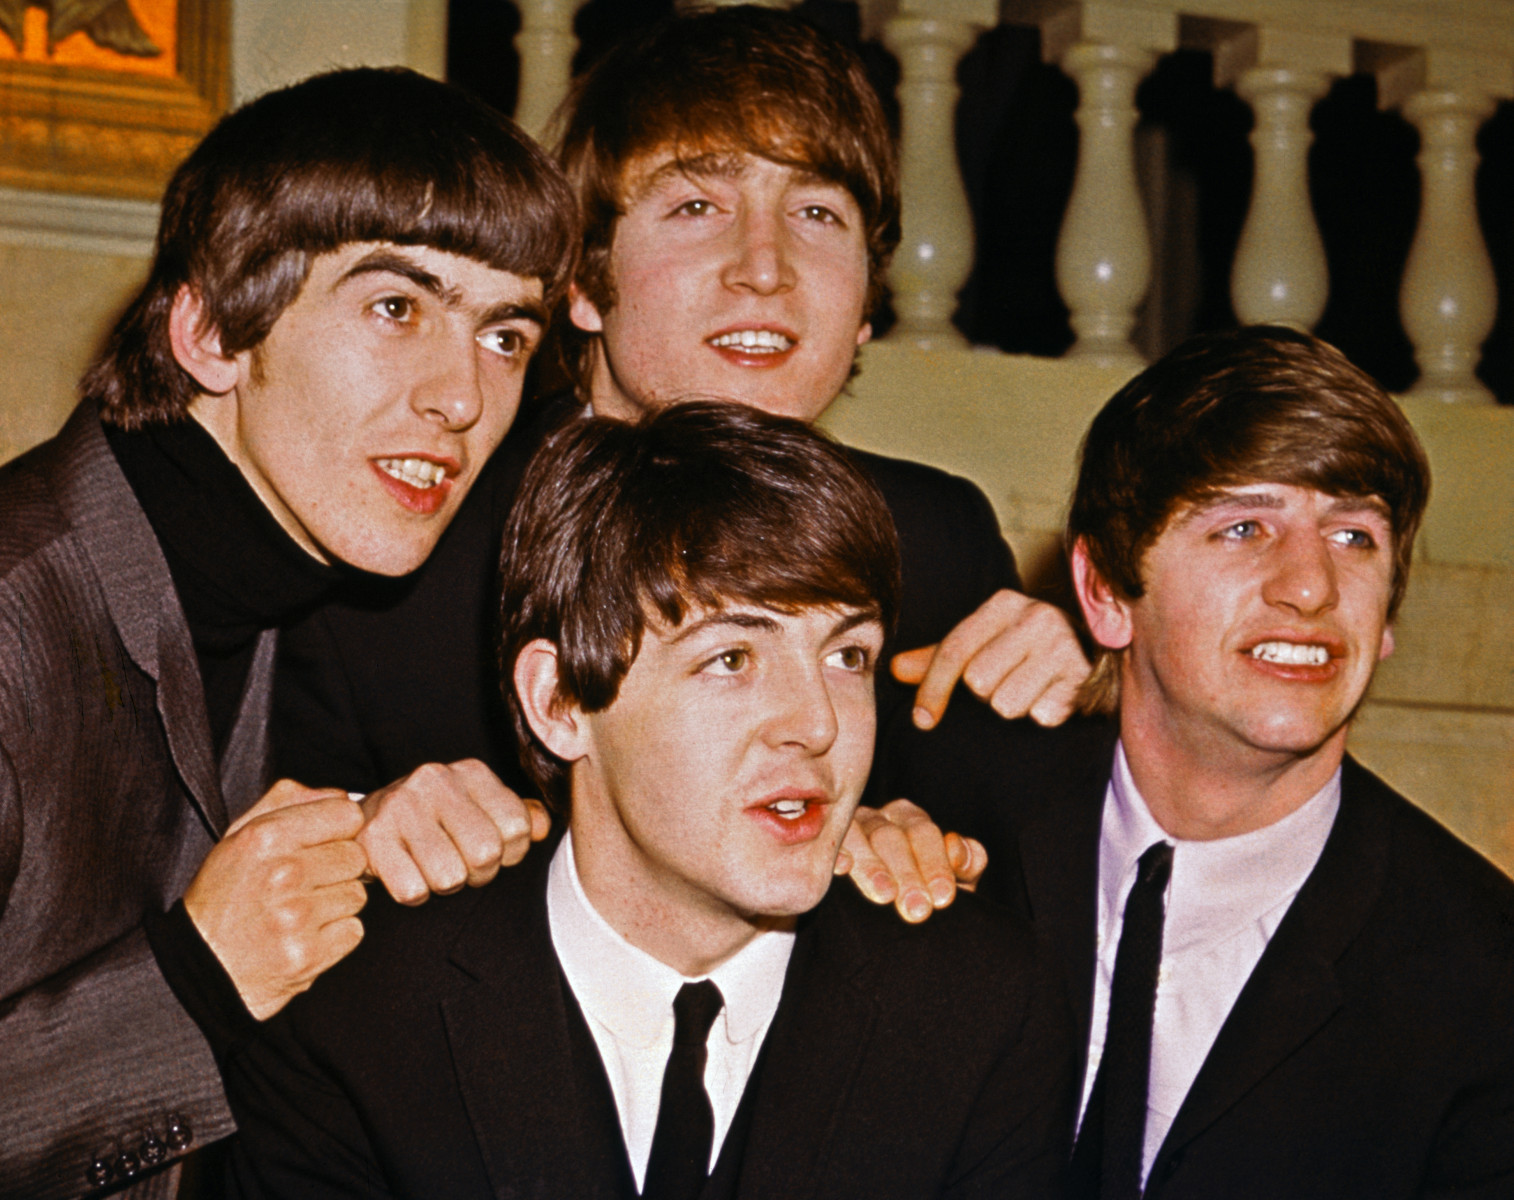 Can You Answer All 20 of These Super Easy Trivia Questions Correctly? The Beatles